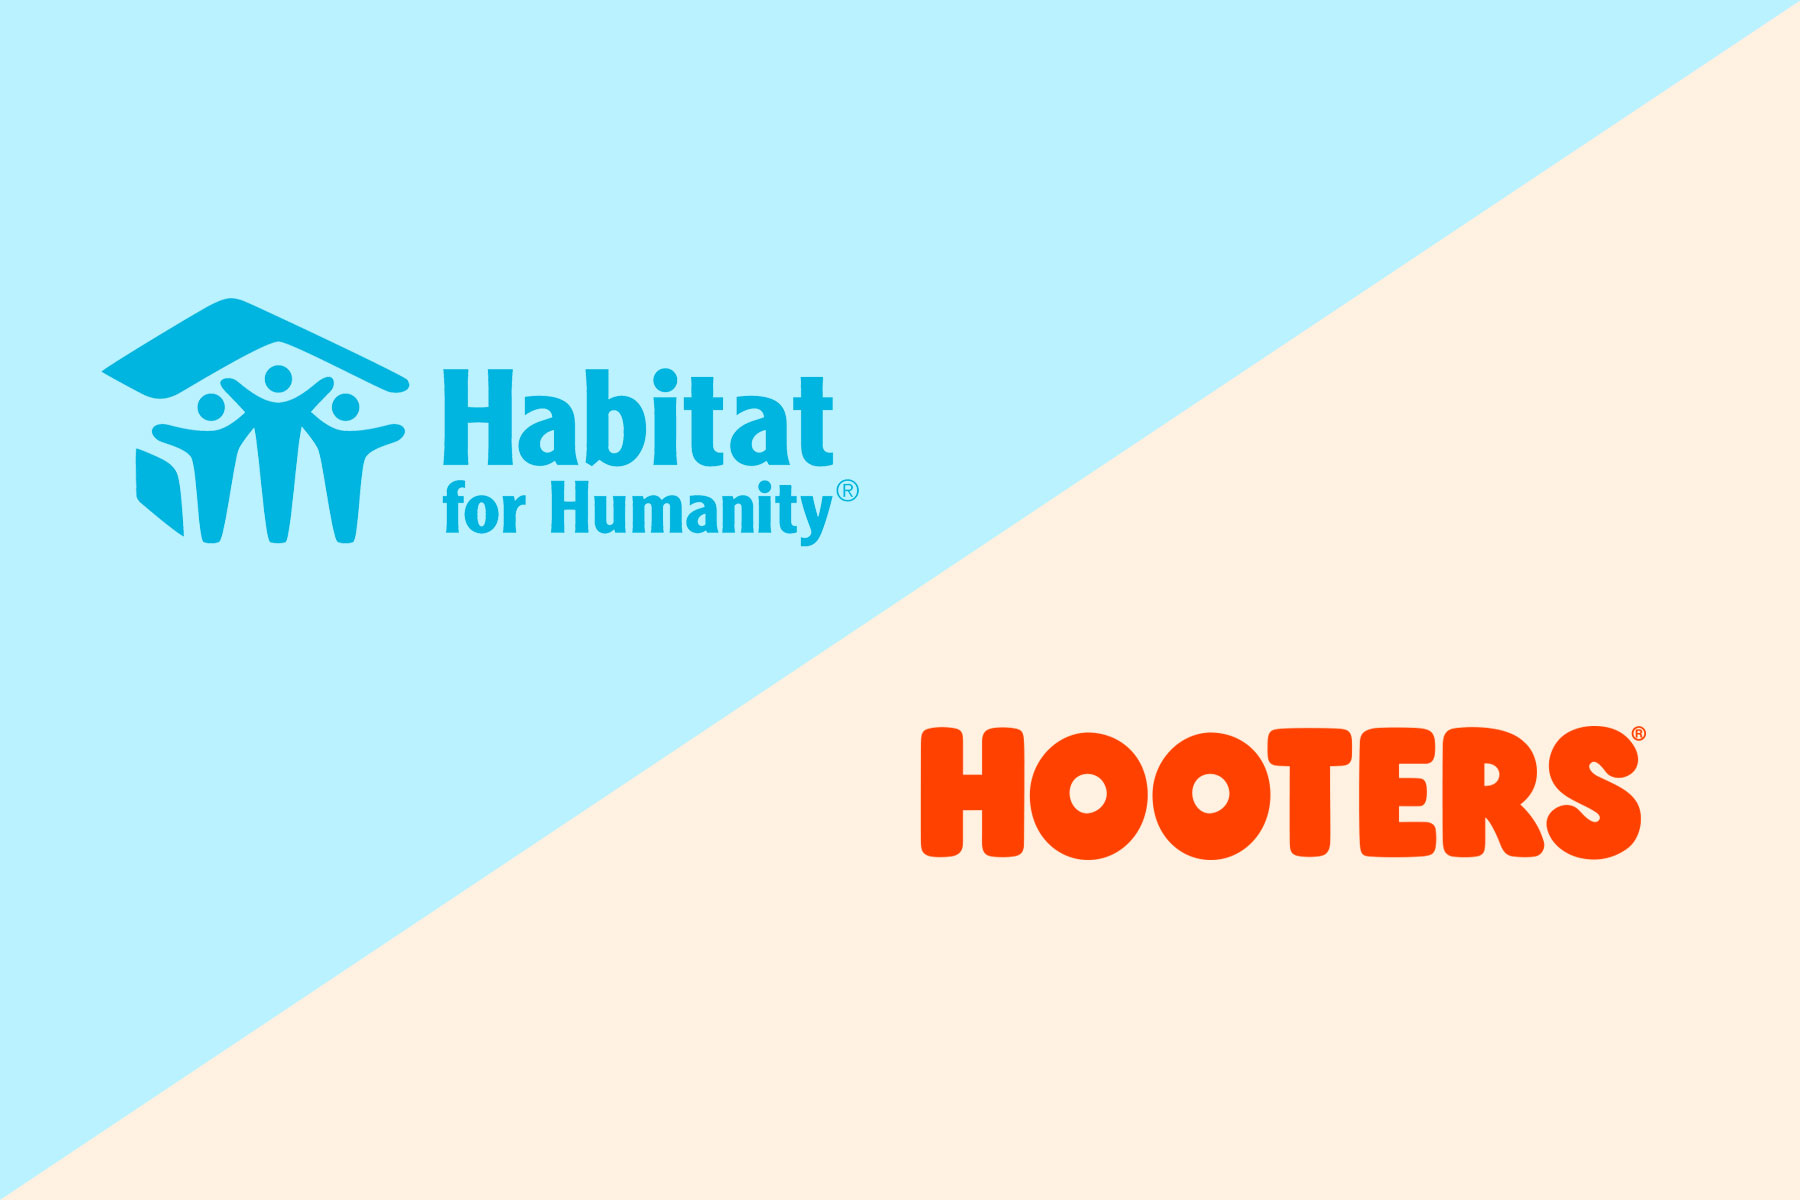 Habitat for Humanity and Hooters